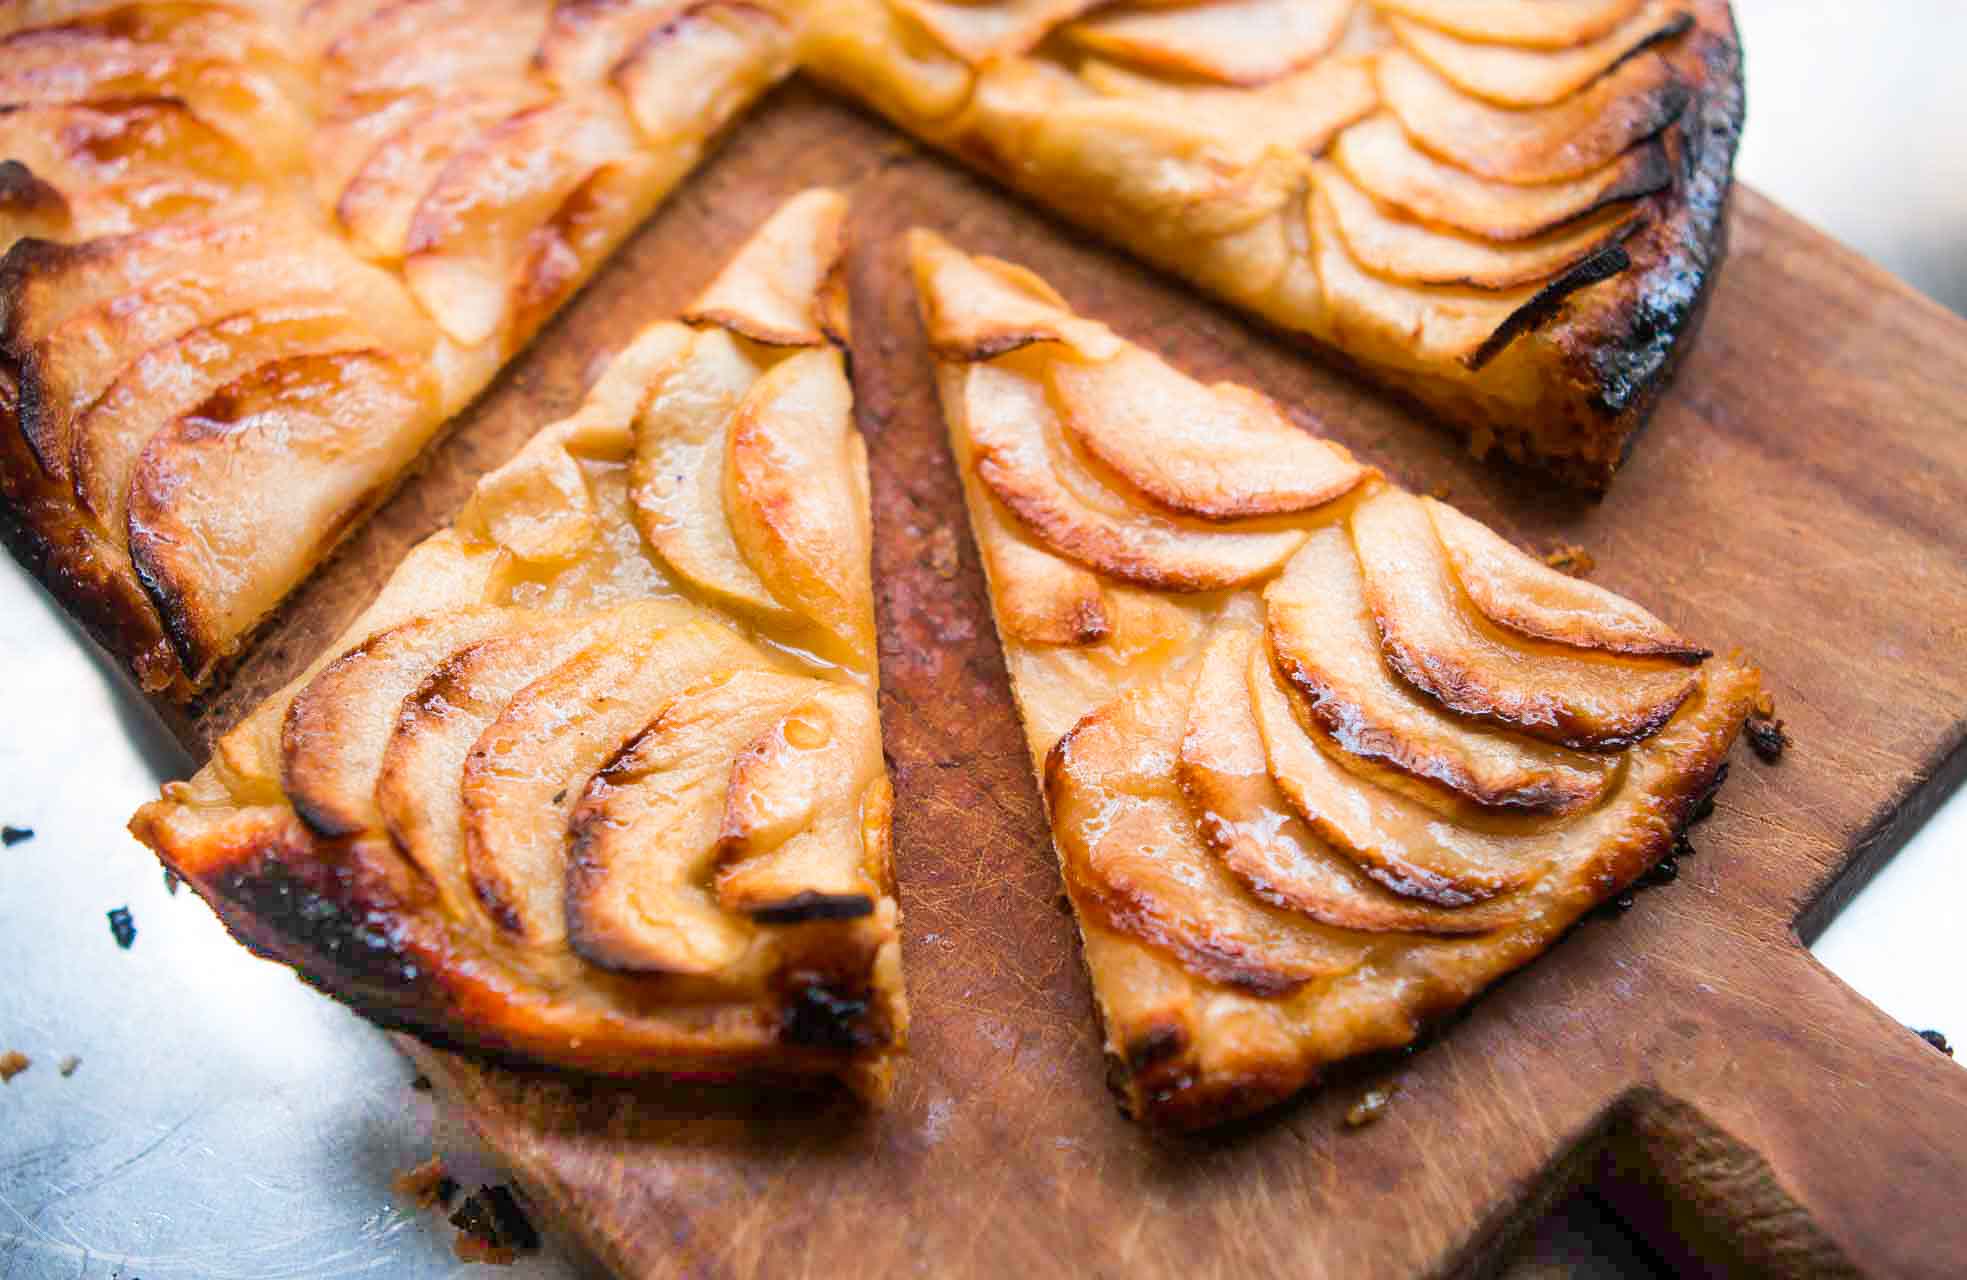 Quick & Apple Tart Recipe - How to Make Apple Puff Pastry